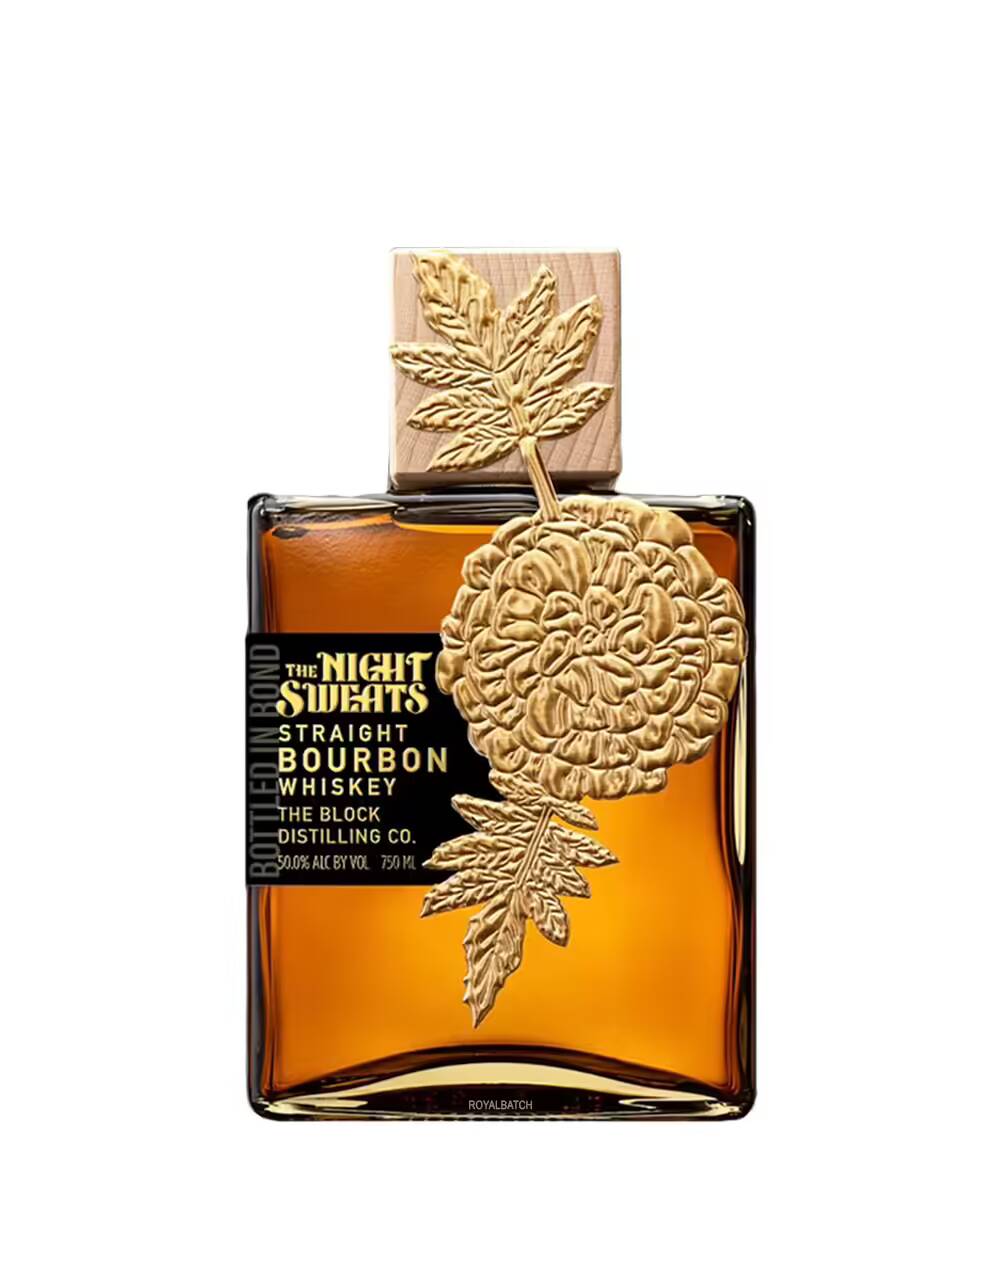 The Block Distilling Co The Night Sweats 4 Year Old Straight Bourbon Whiskey